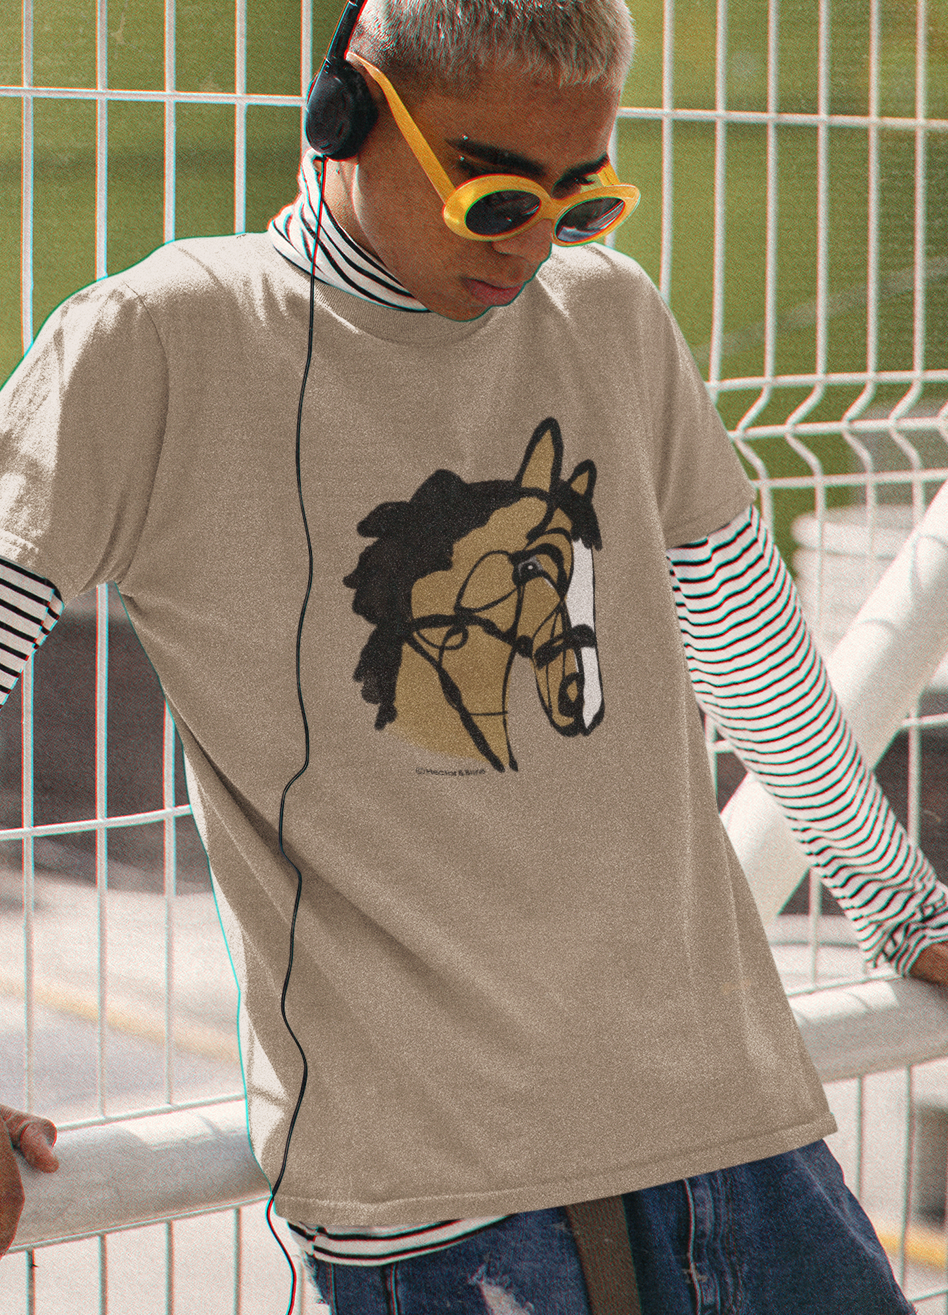 Horse T-shirt - Cool young man wearing an 'I love my horse' pony t-shirt design on camel colour vegan cotton by Hector and Bone